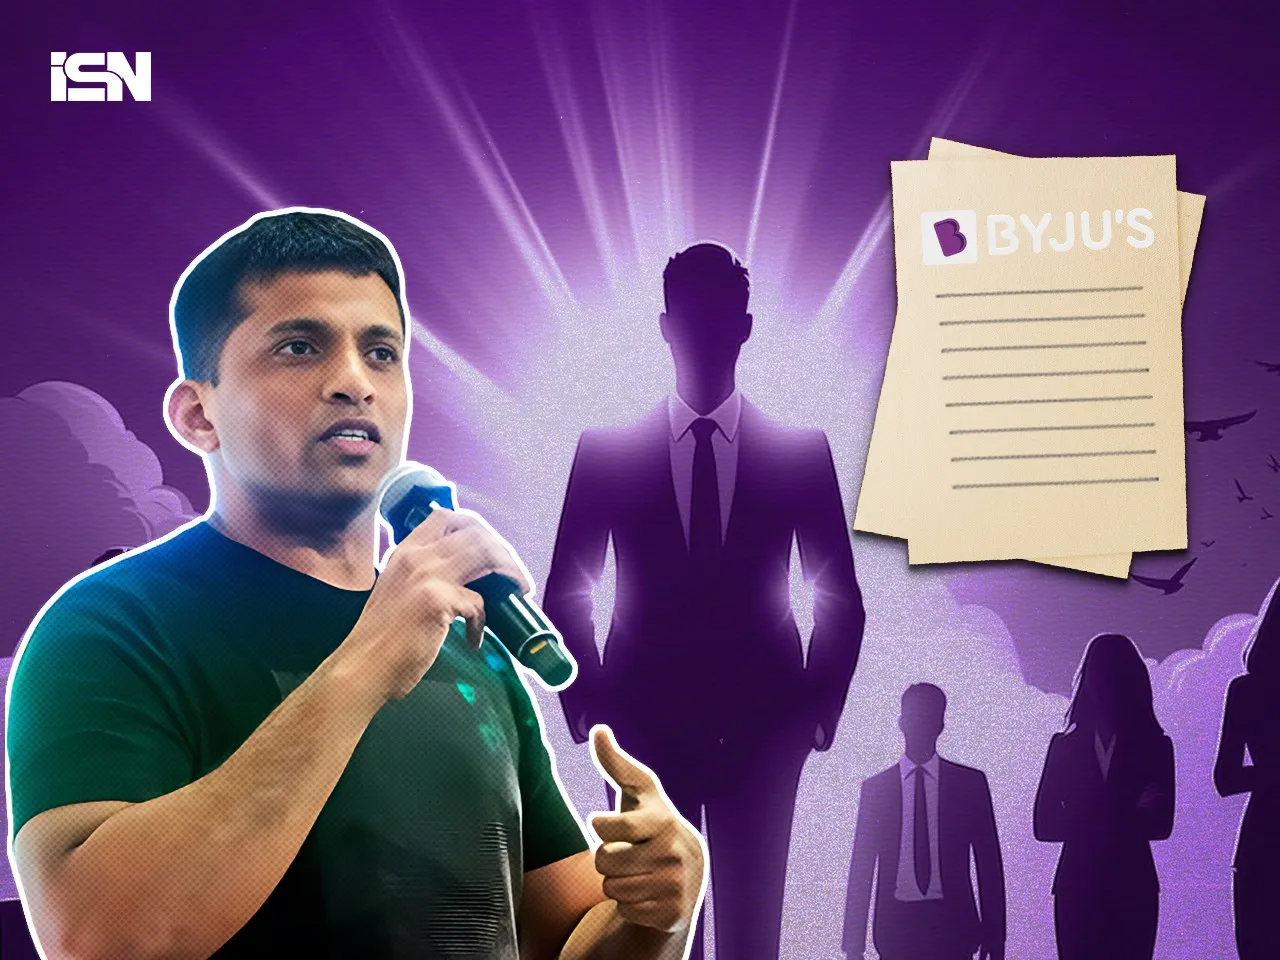 byjus ceo letter to shareholders